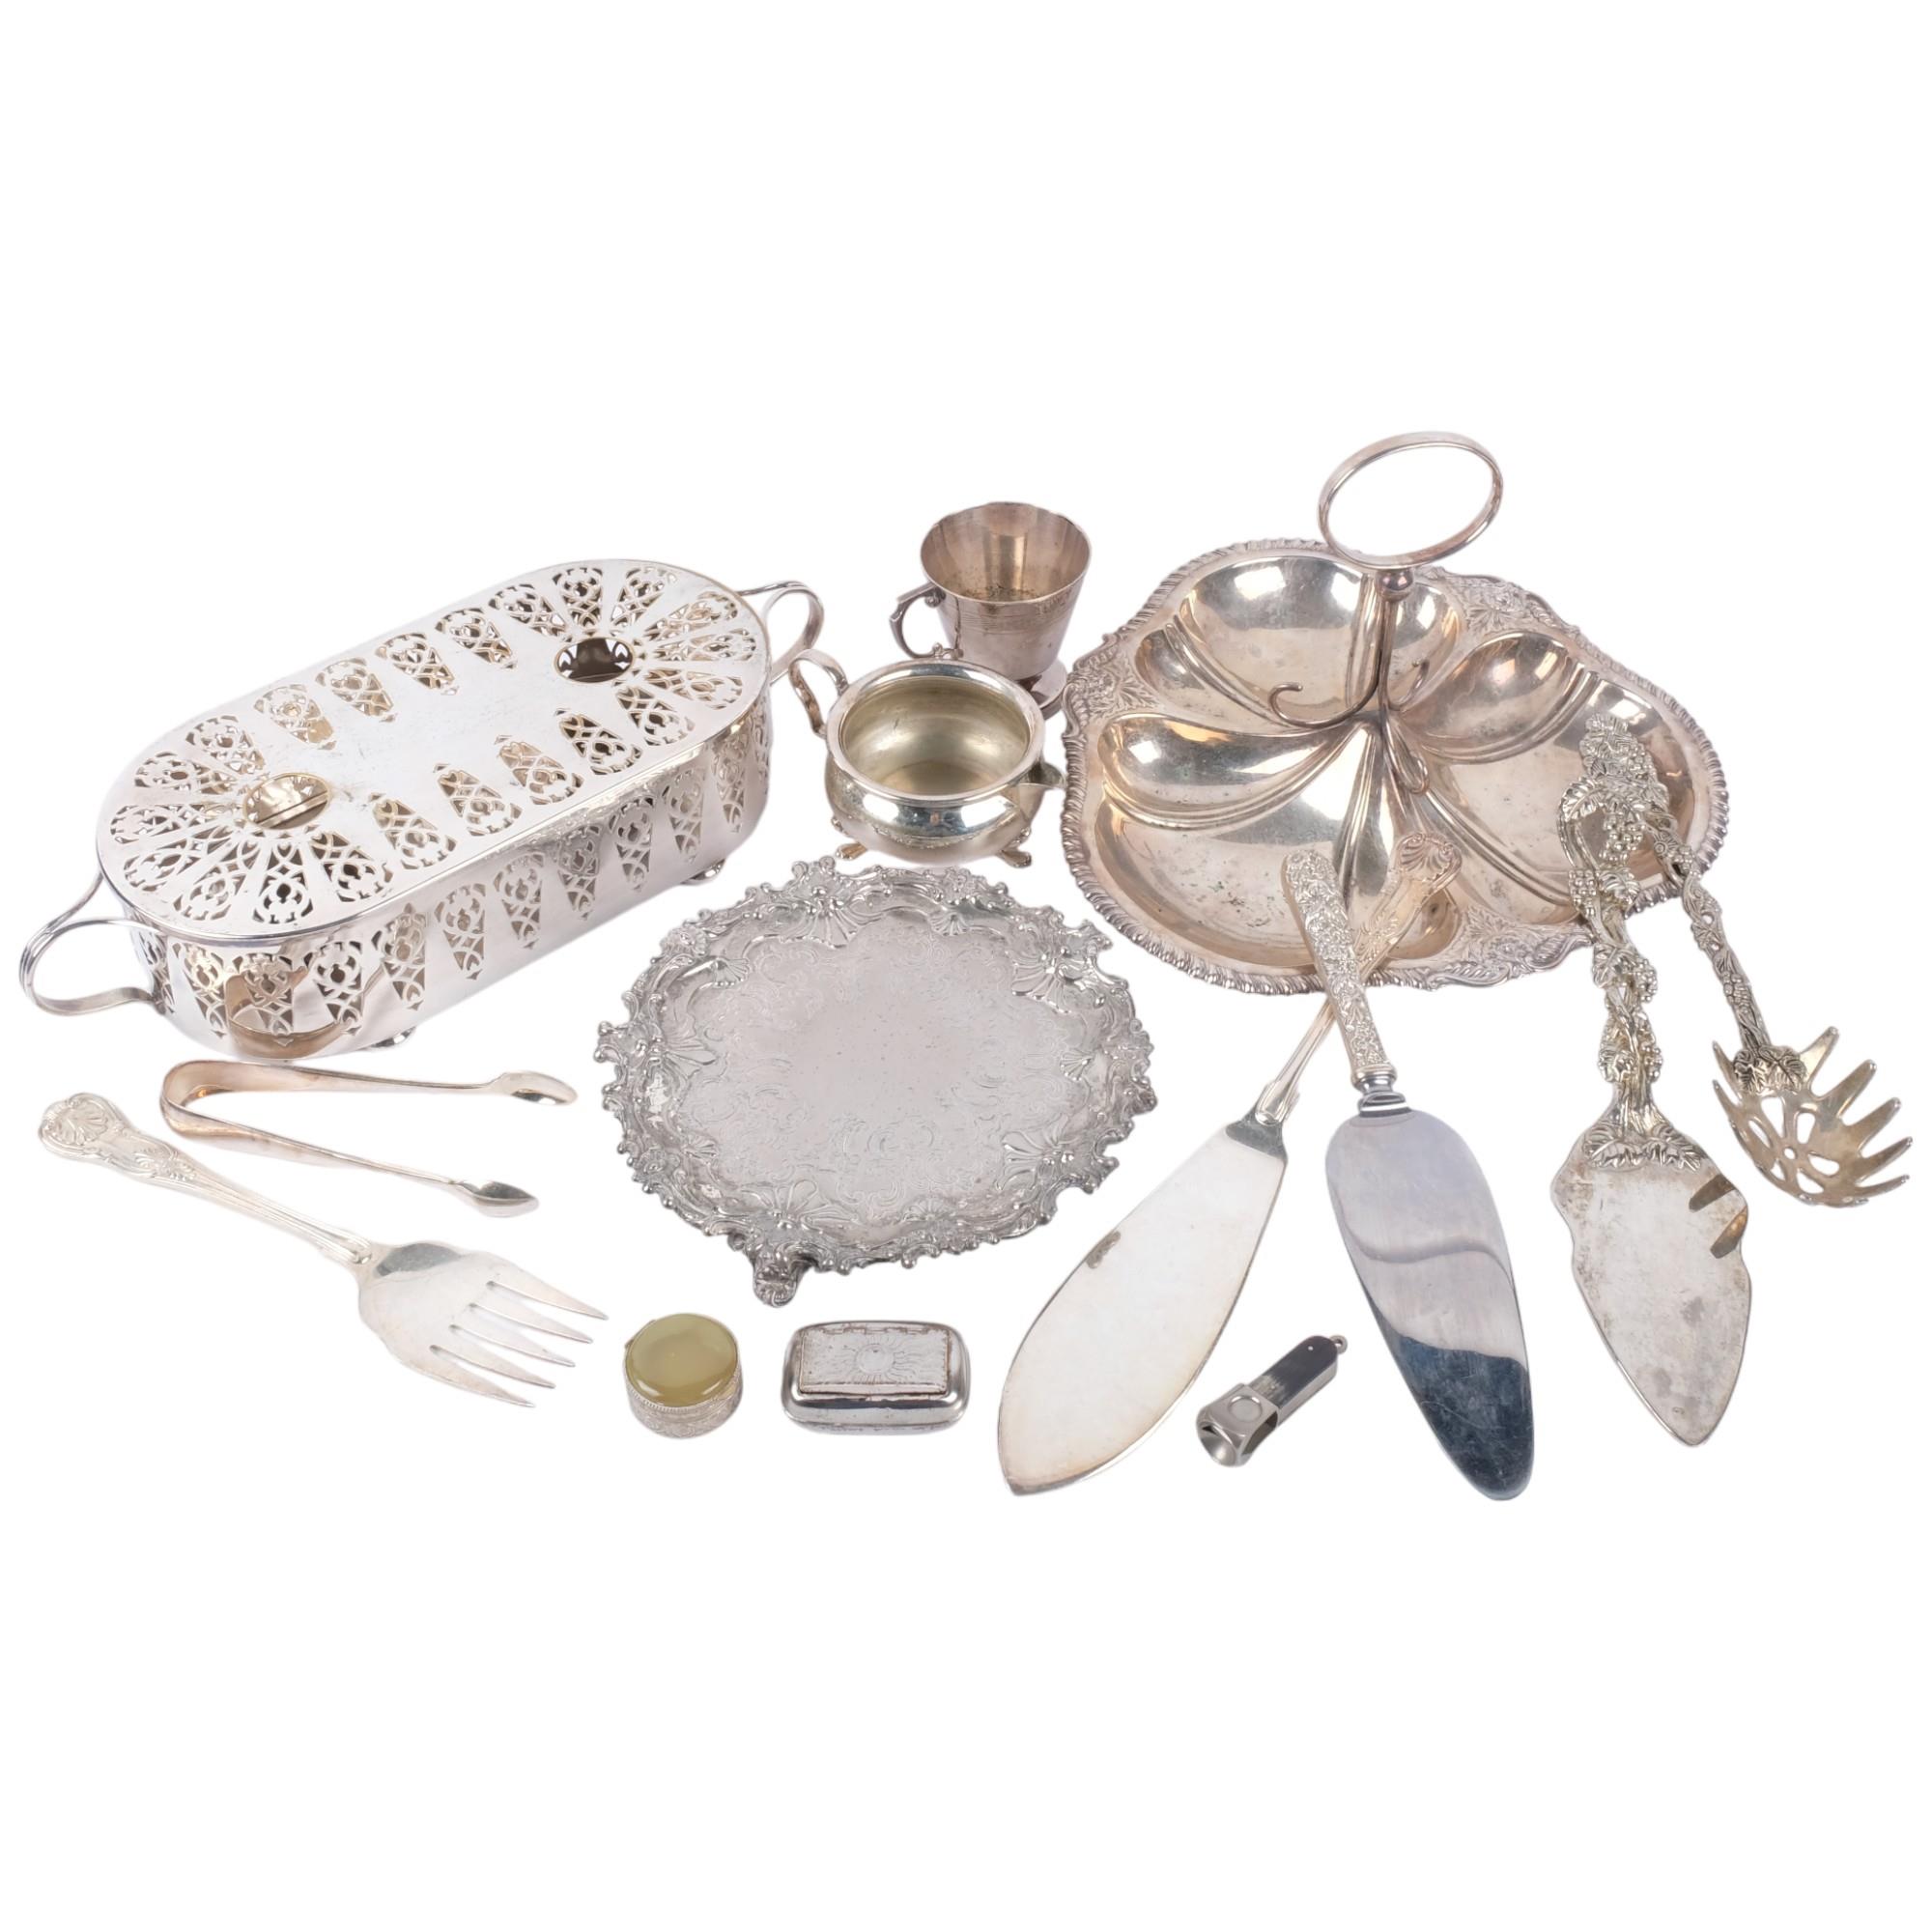 A quantity of silver plate, including hors d'oeuvres dish, table centre hot plate, salver, etc